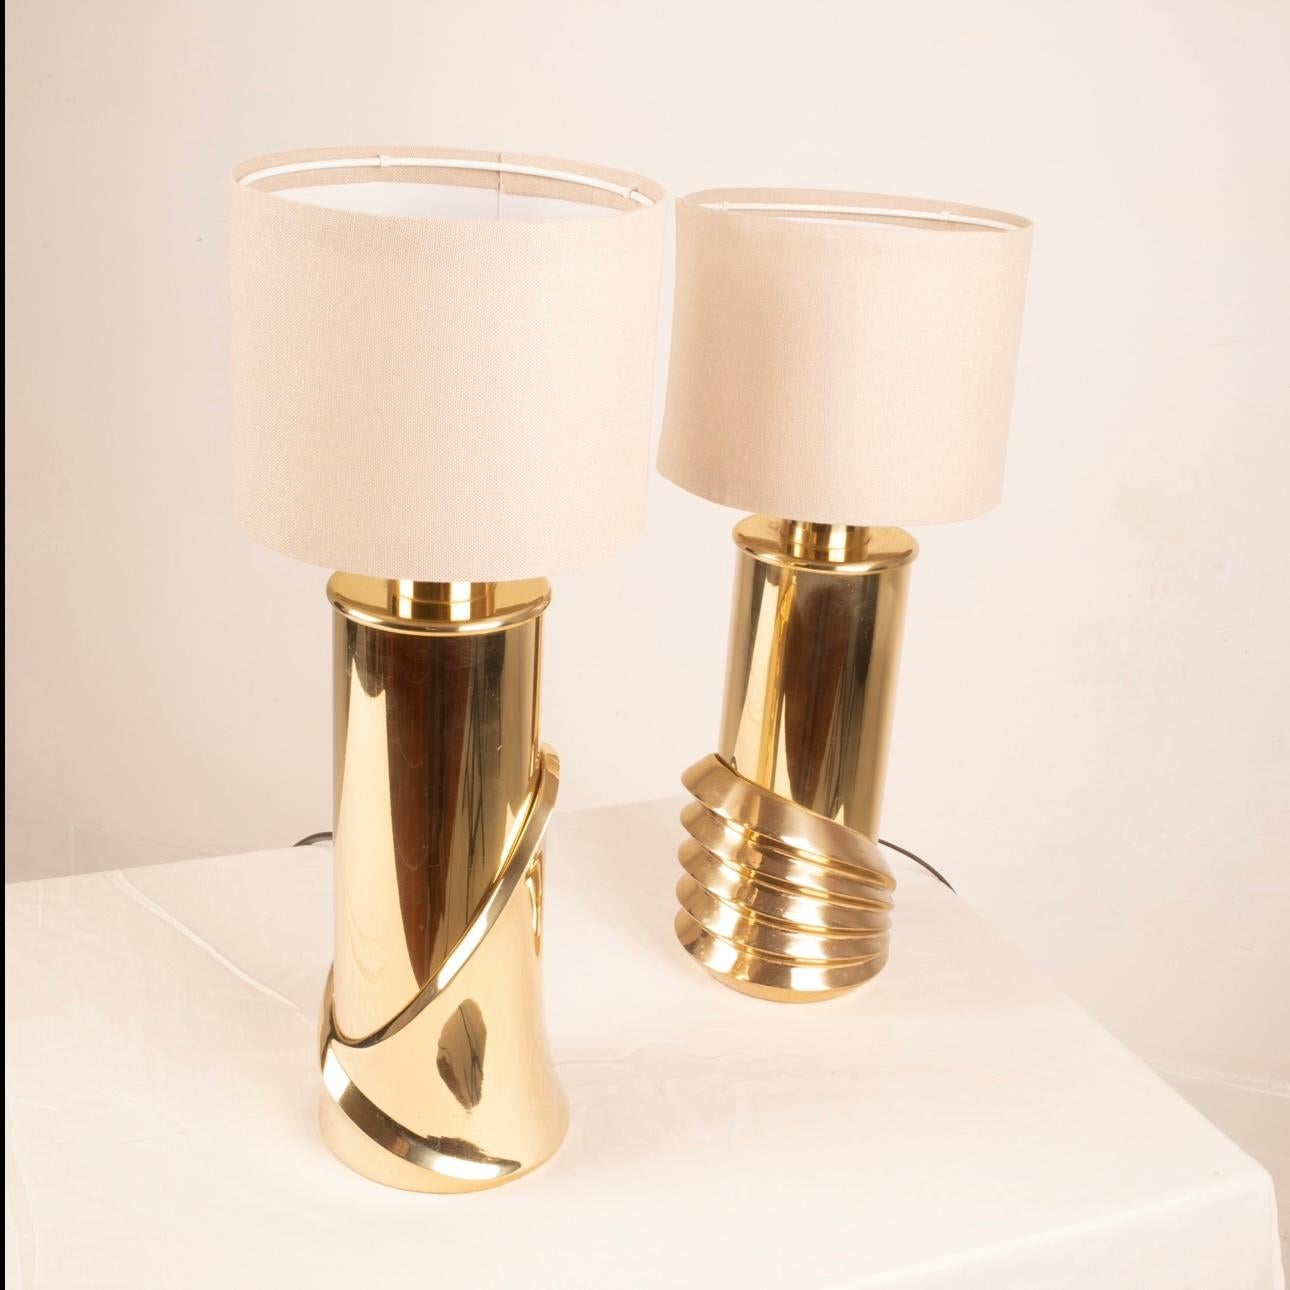 Pair of Brass Lamps by Luciano Frigerio for Frigerio of Desio For Sale 2